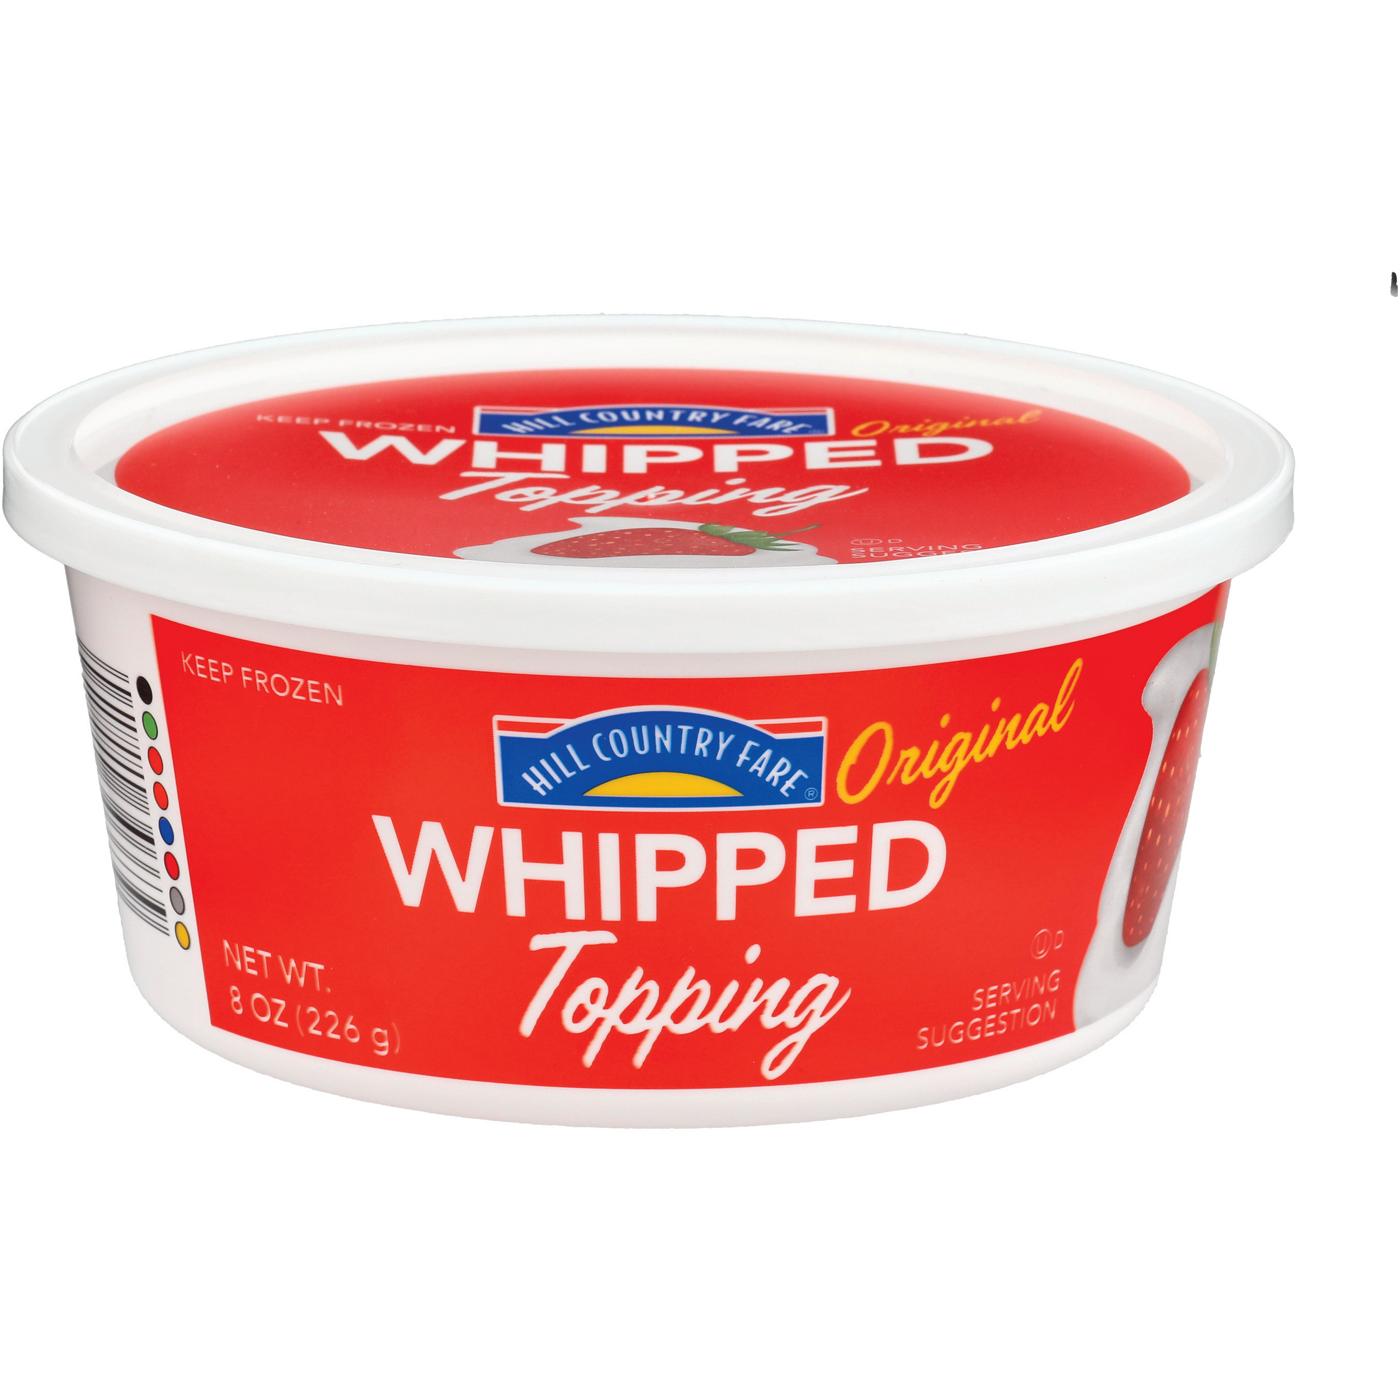 Hill Country Fare Original Whipped Topping; image 1 of 2